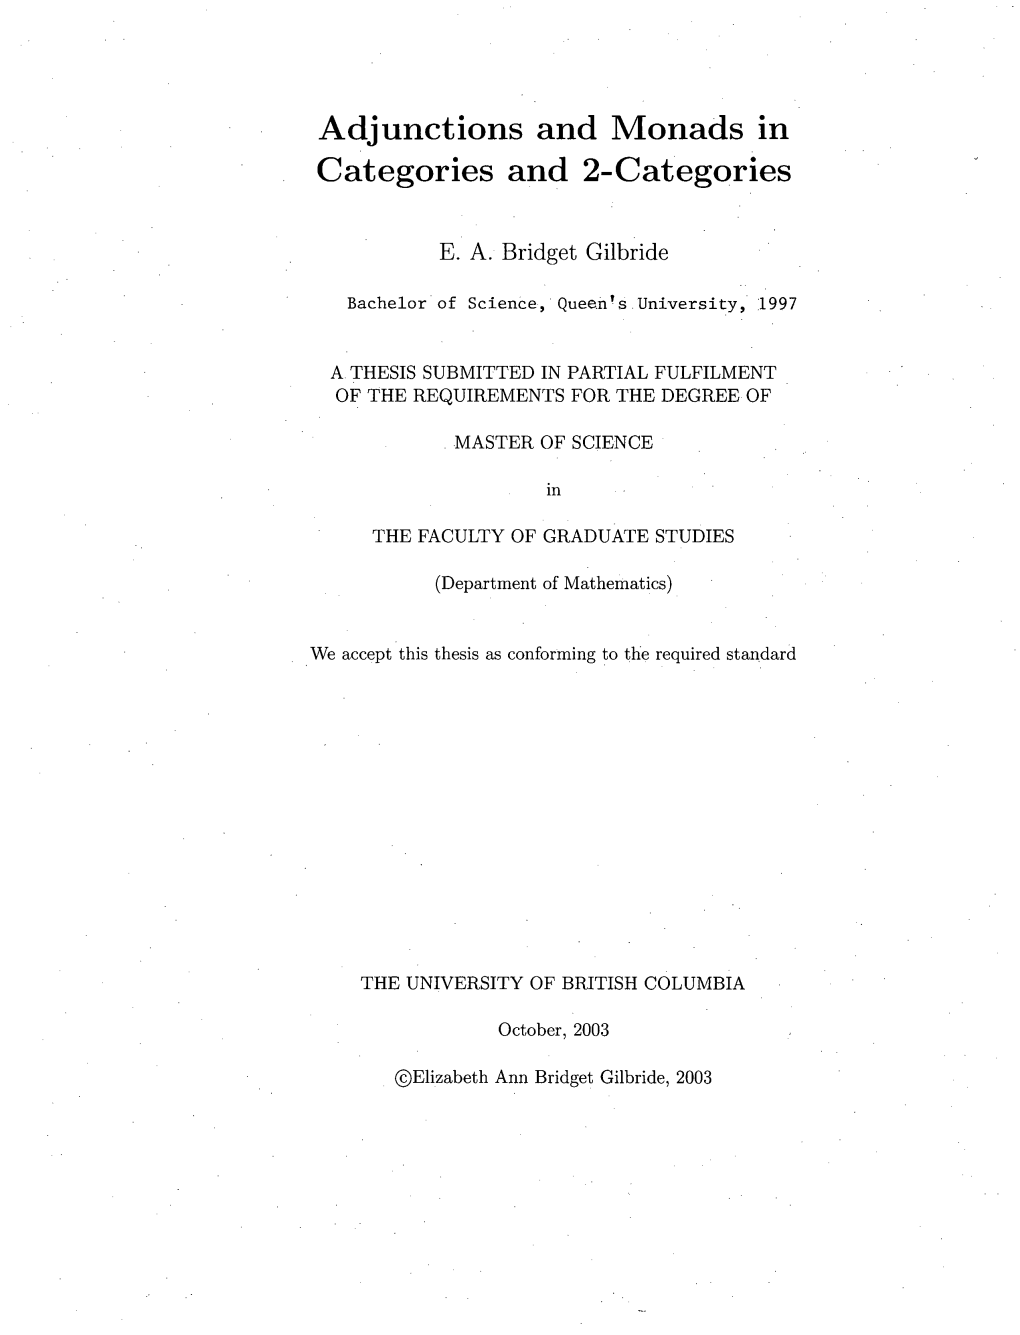 Adjunctions and Monads in Categories and 2-Categories